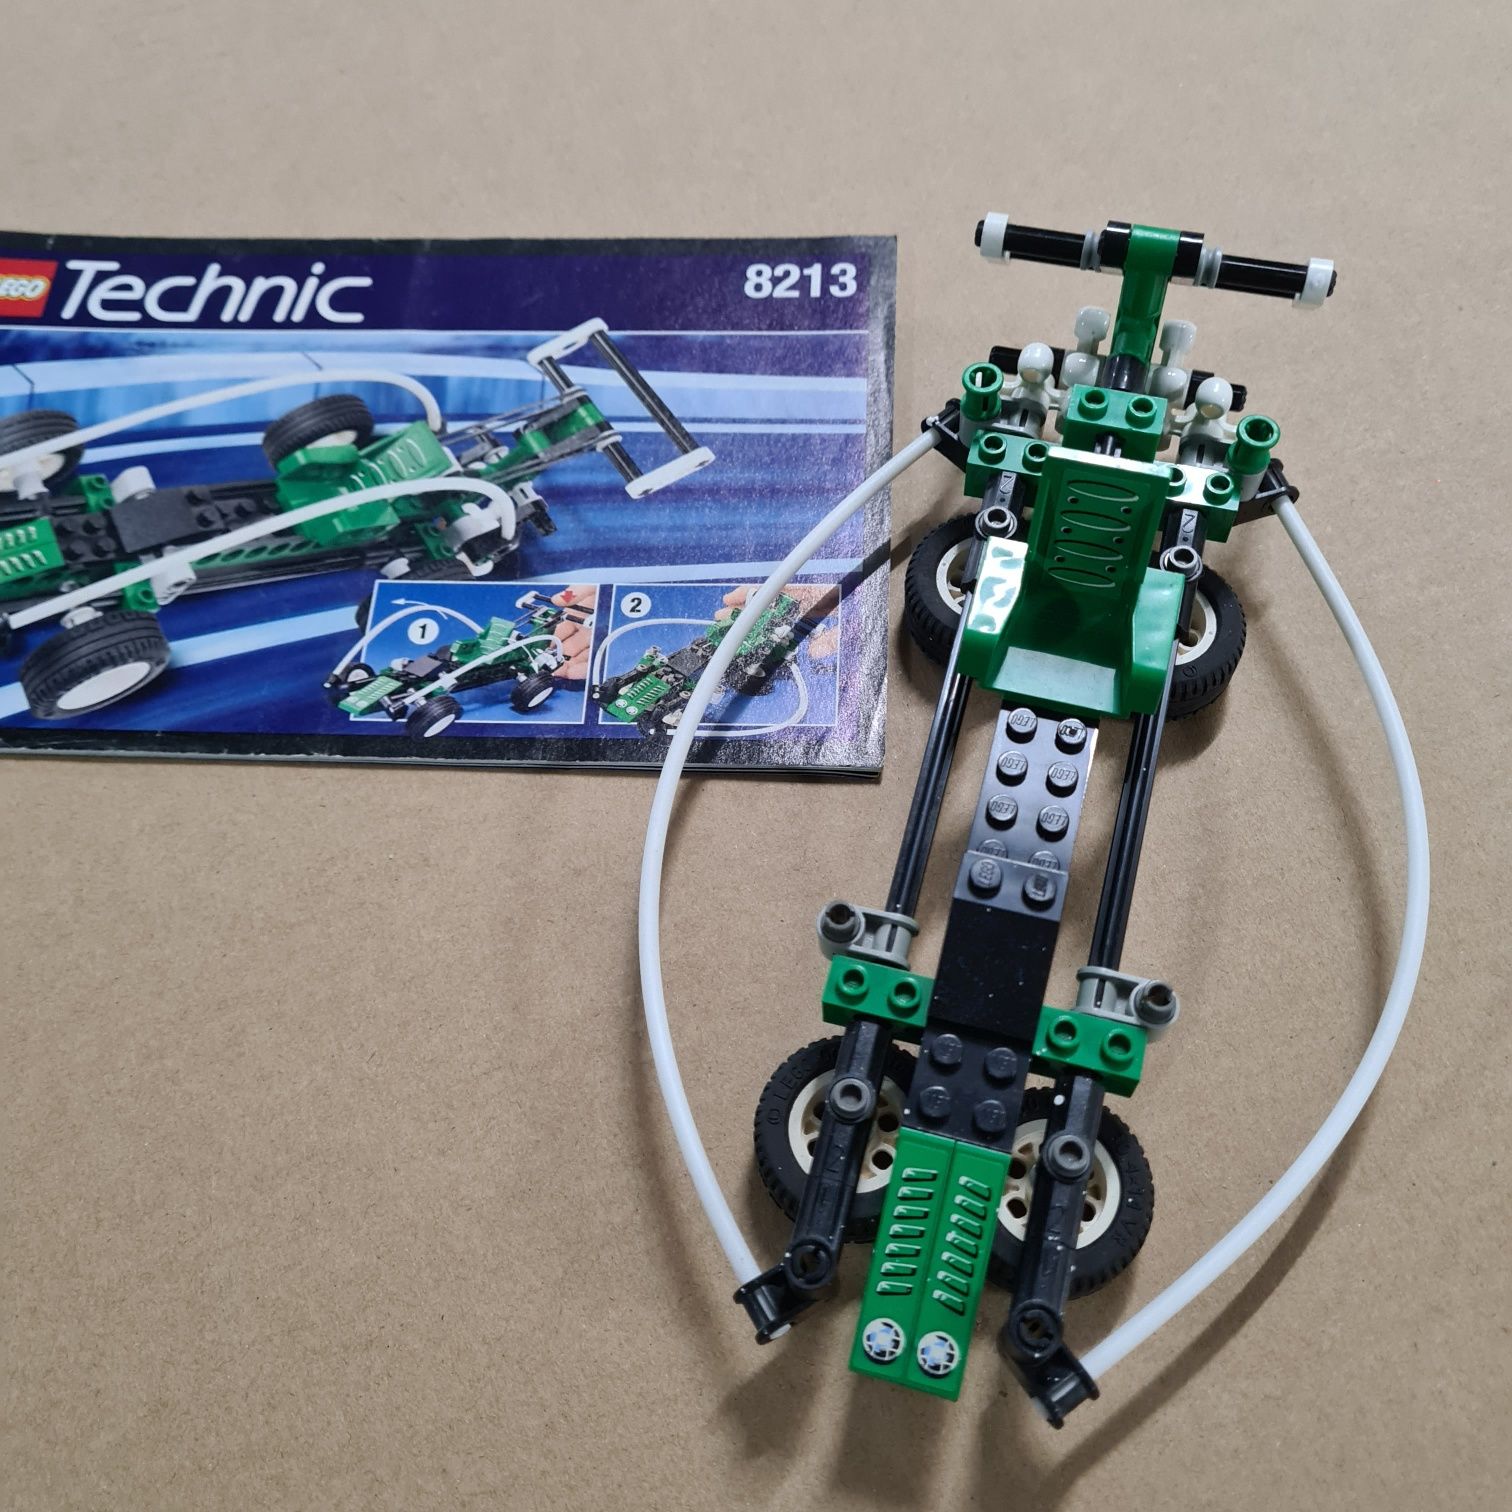 Lego 8213 Technic - The Wasp